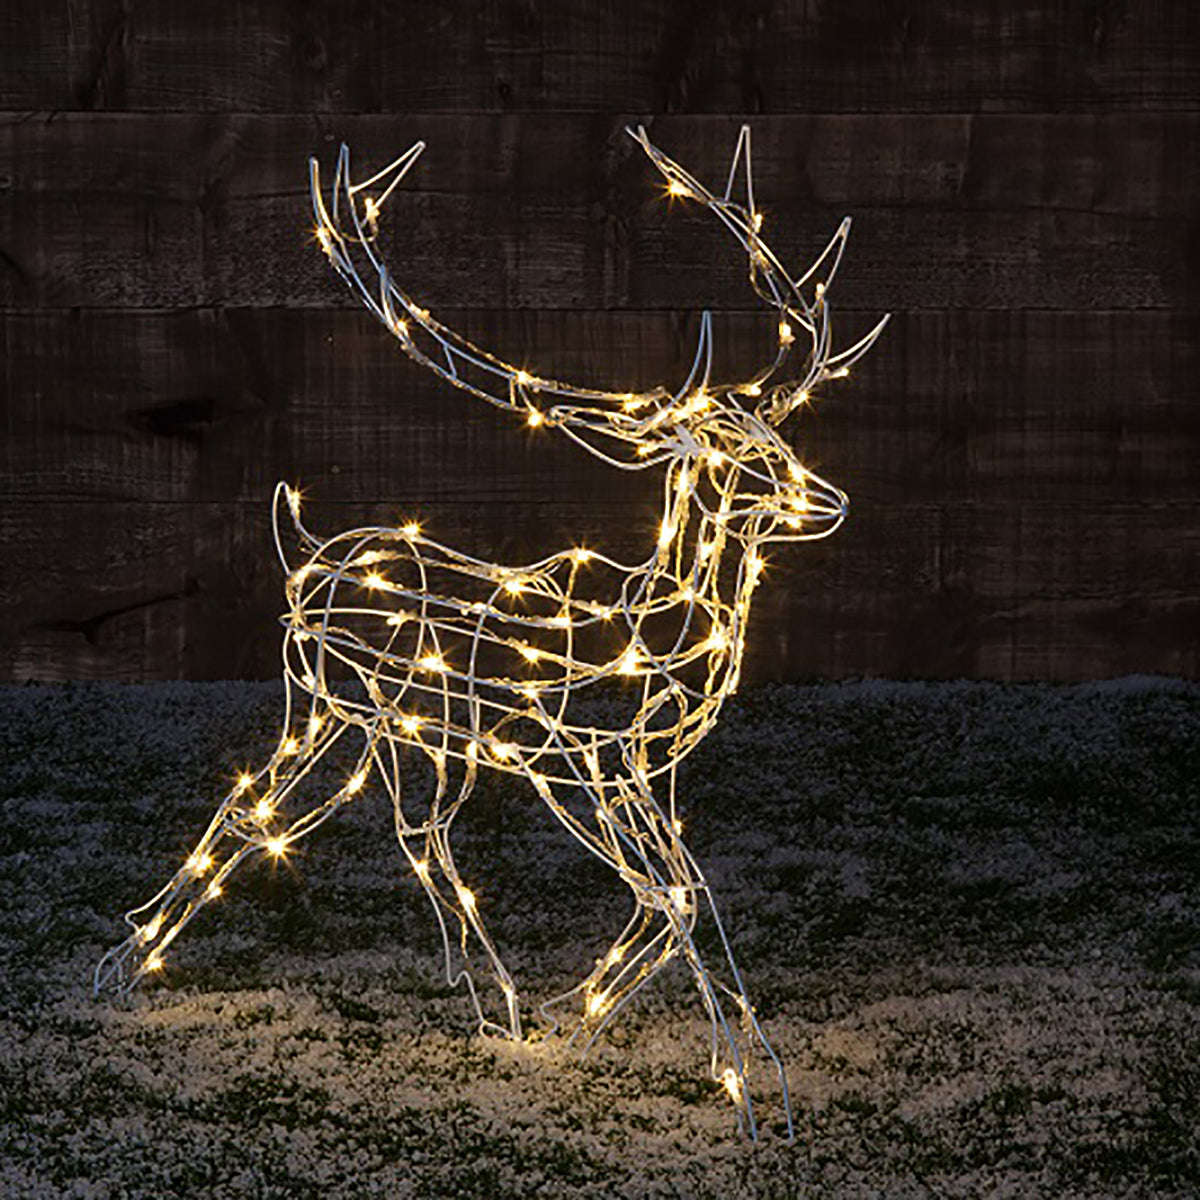 Noma Christmas 70CM Wire Frame Running Reindeer with 90 Warm White LED Lights